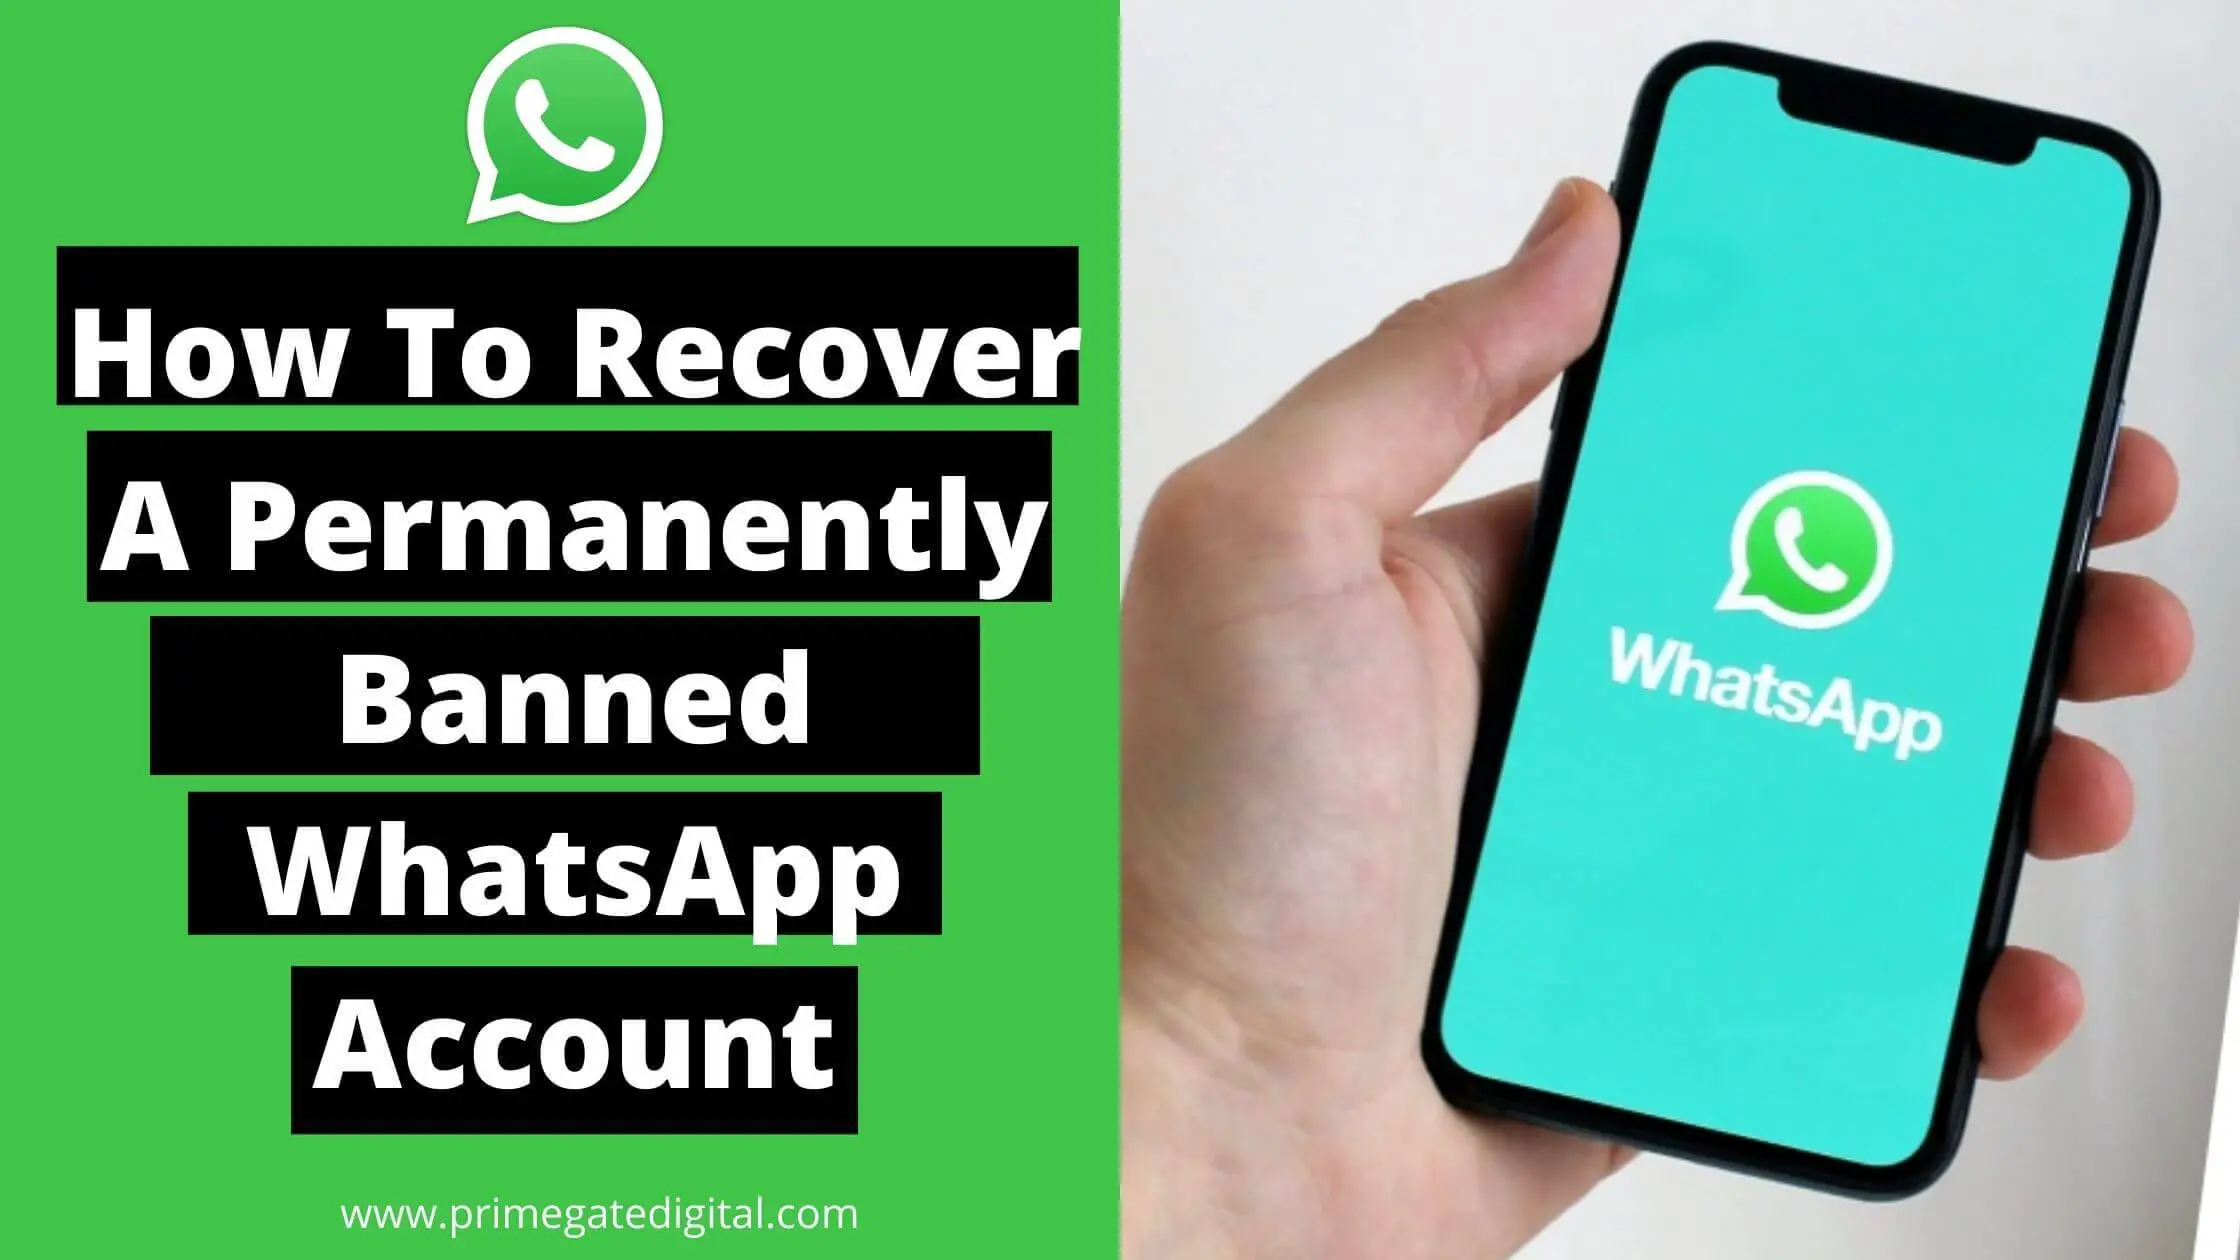 How To Recover A Permanently Banned WhatsApp Account